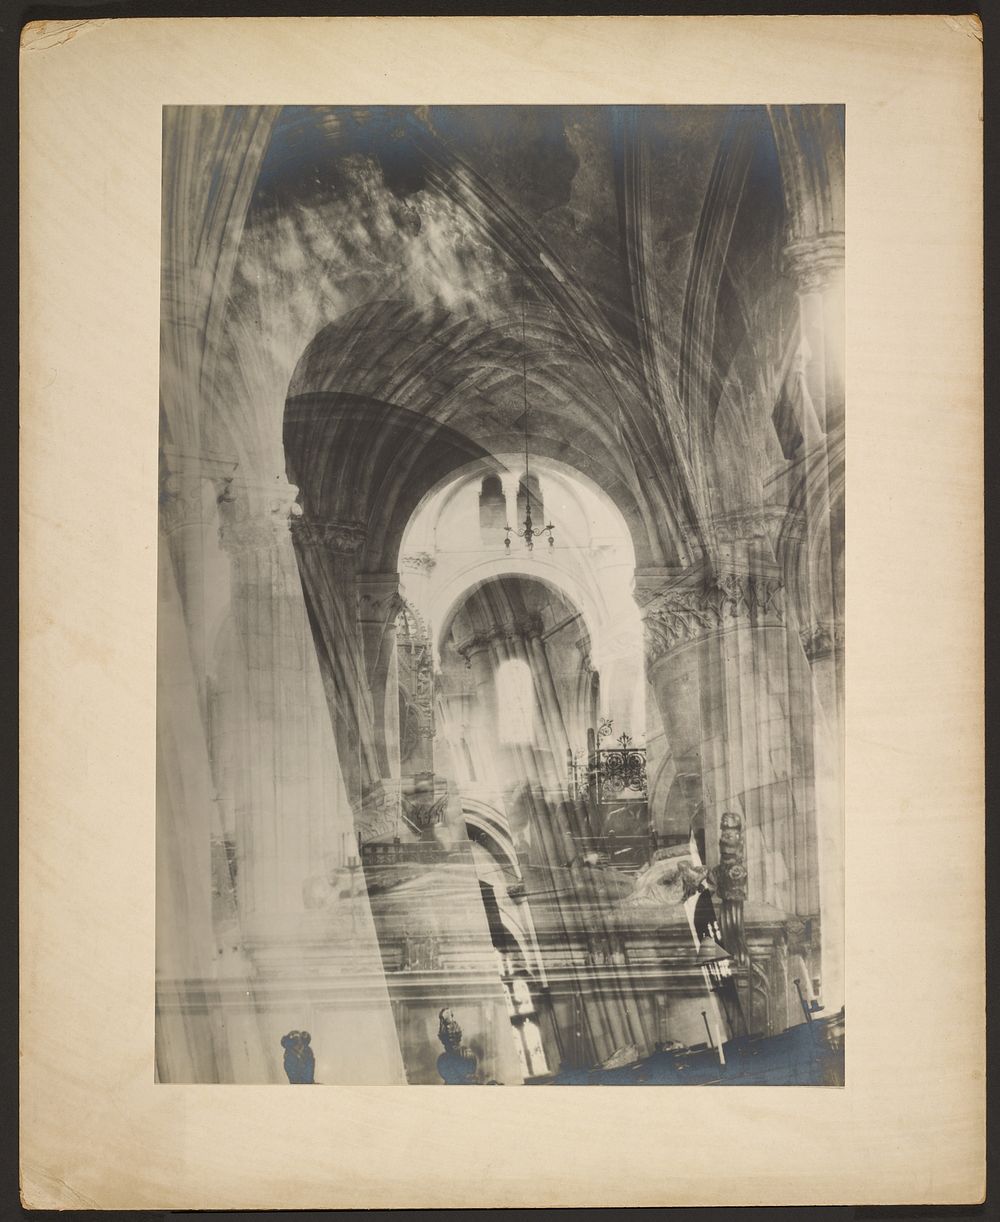 English Cathedral Abstraction by Francis Bruguière